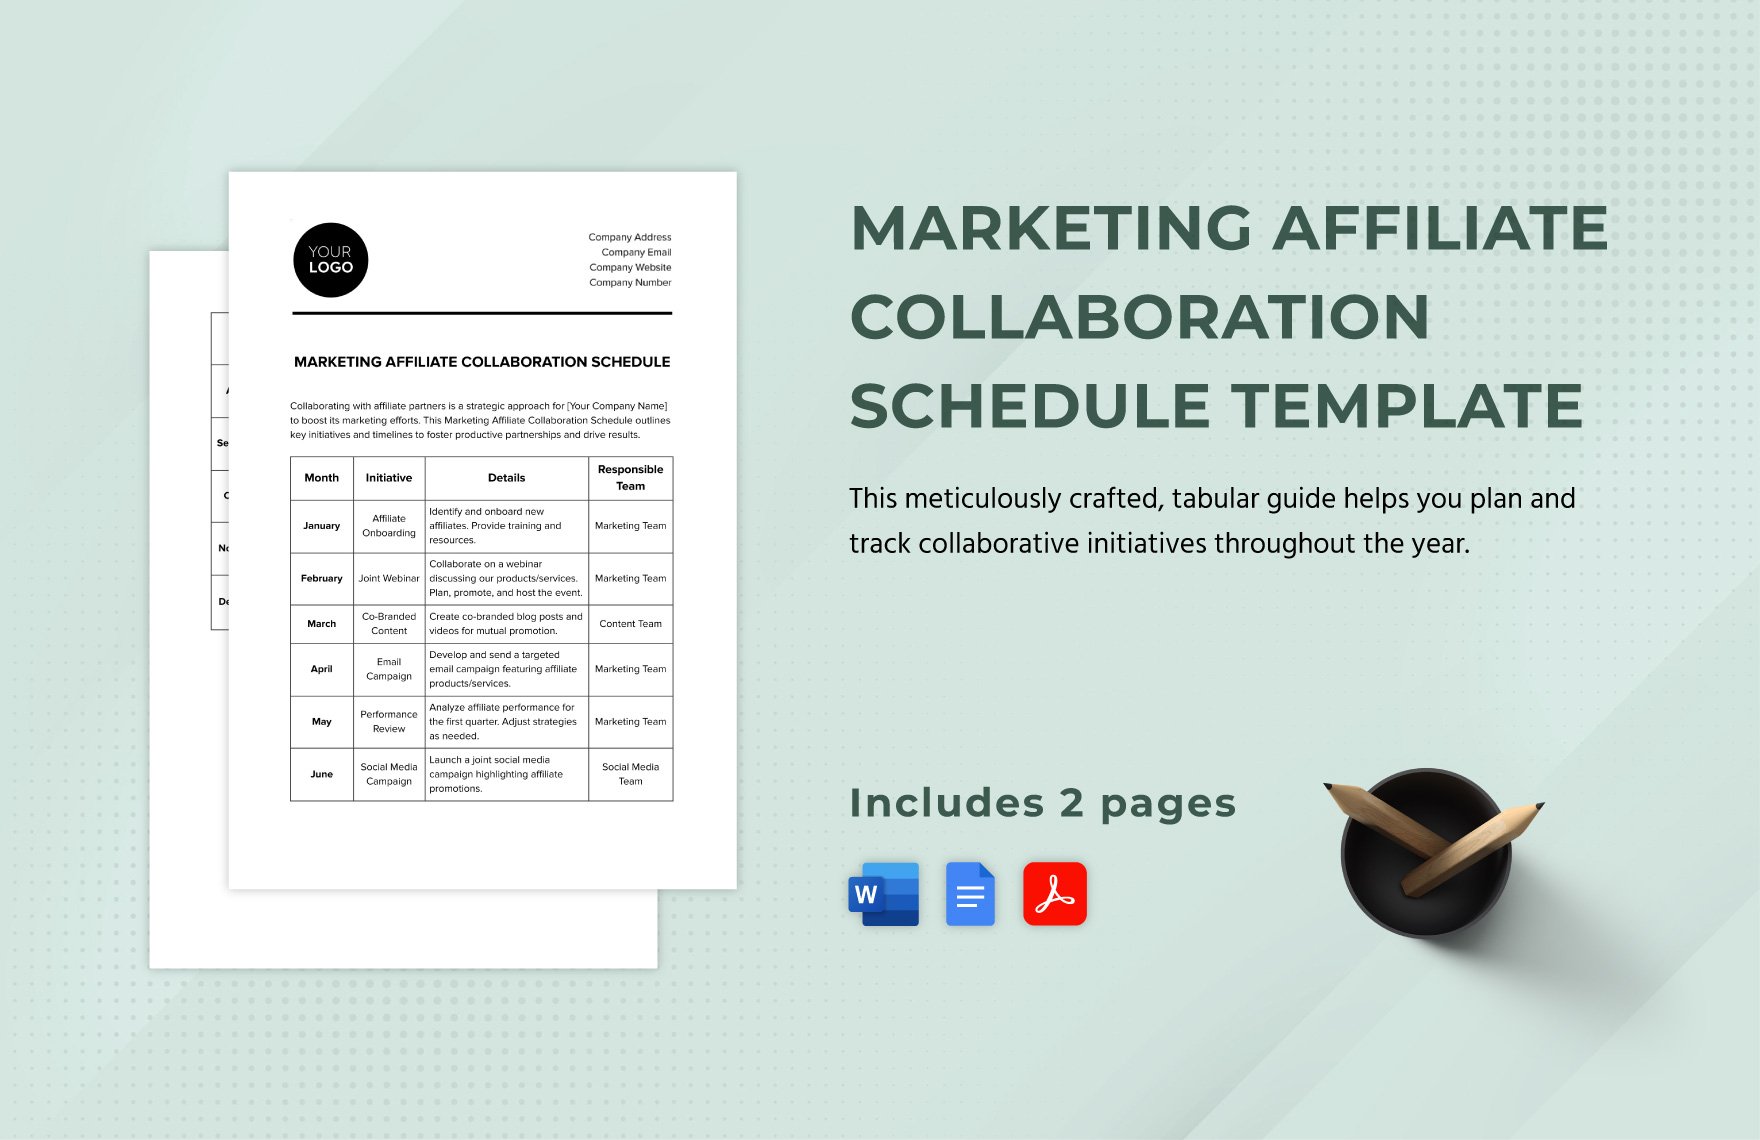 Marketing Affiliate Collaboration Schedule Template in Word, Google Docs, PDF